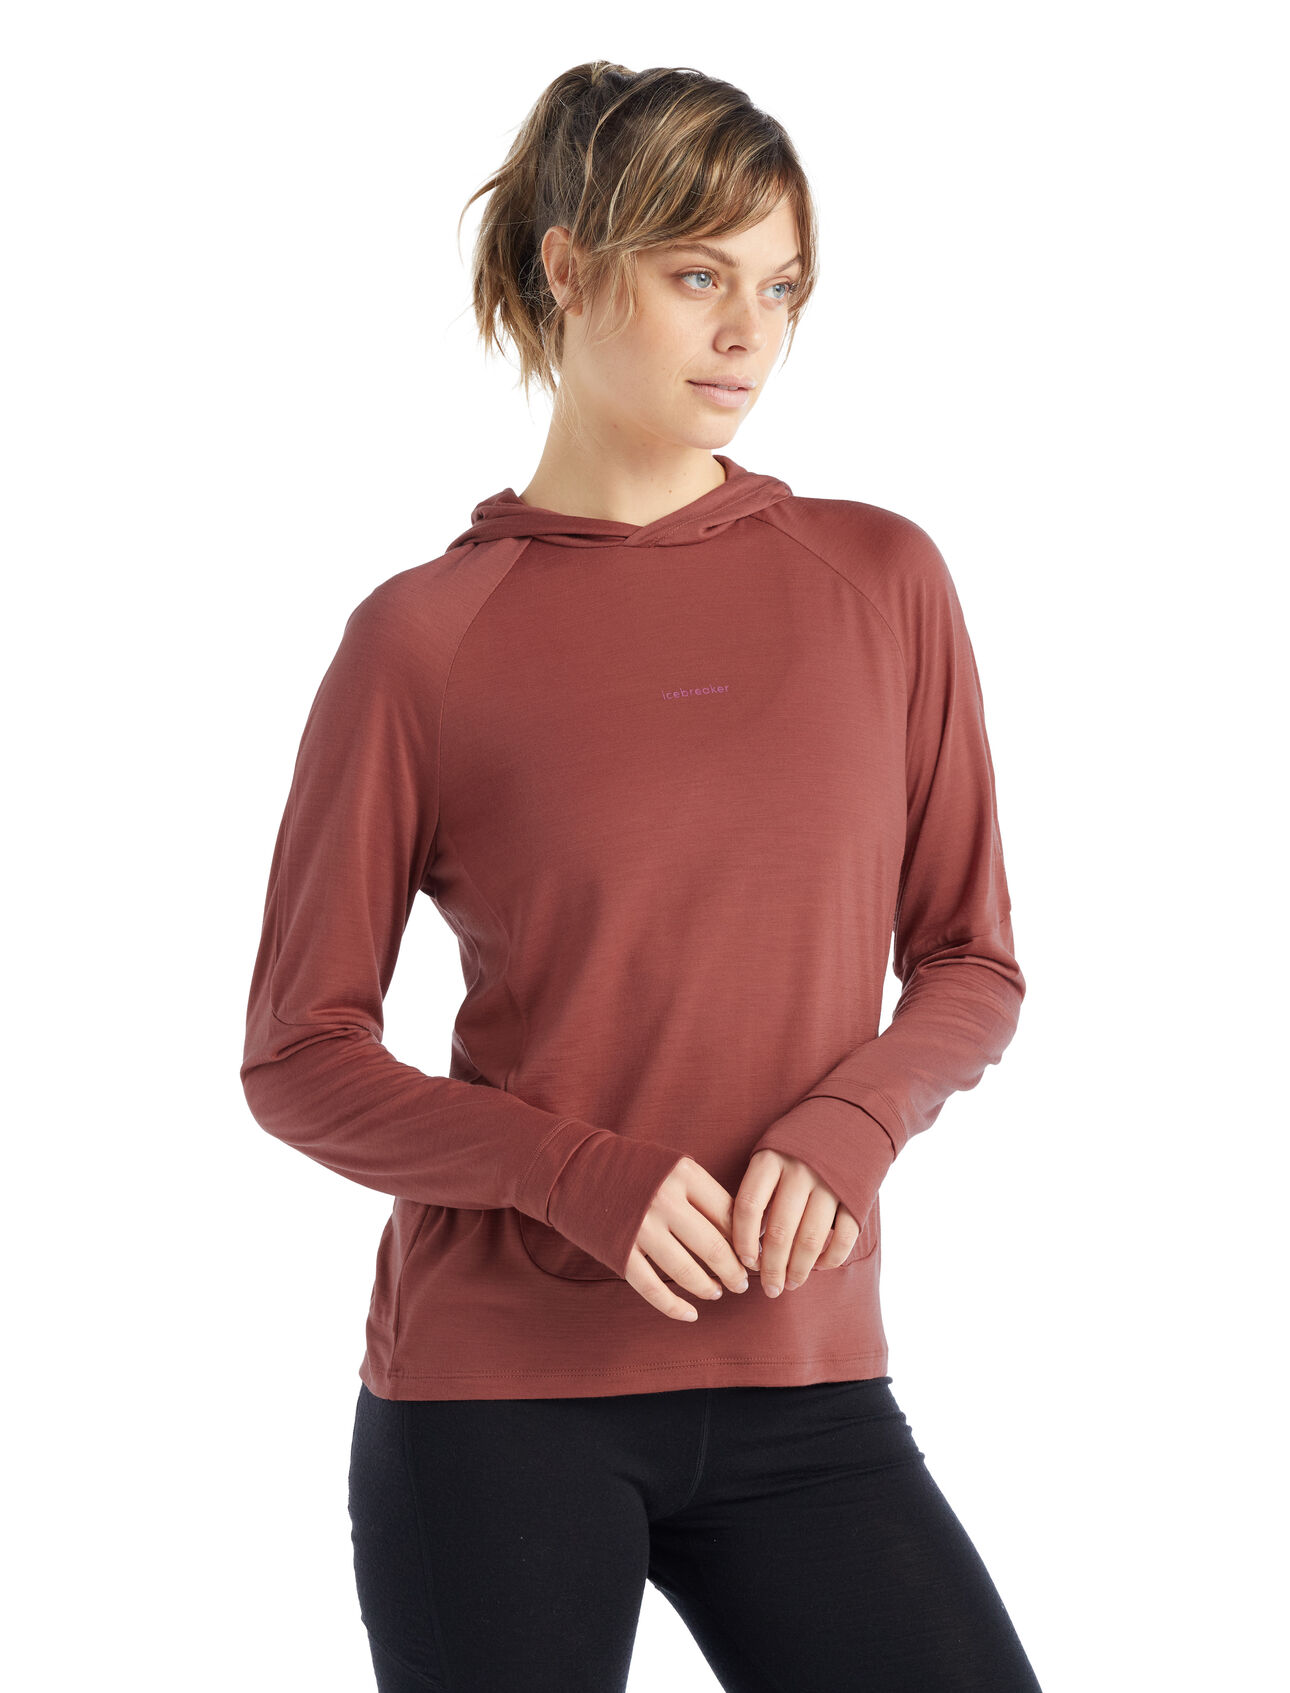 Womens 125 Cool-Lite™ Merino Blend Sphere Long Sleeve Hoodie A lightweight and breathable performance hoodie designed for aerobic days outside, the Cool-Lite™ Long Sleeve Hoodie features our moisture-wicking Cool-Lite™ merino jersey fabric.